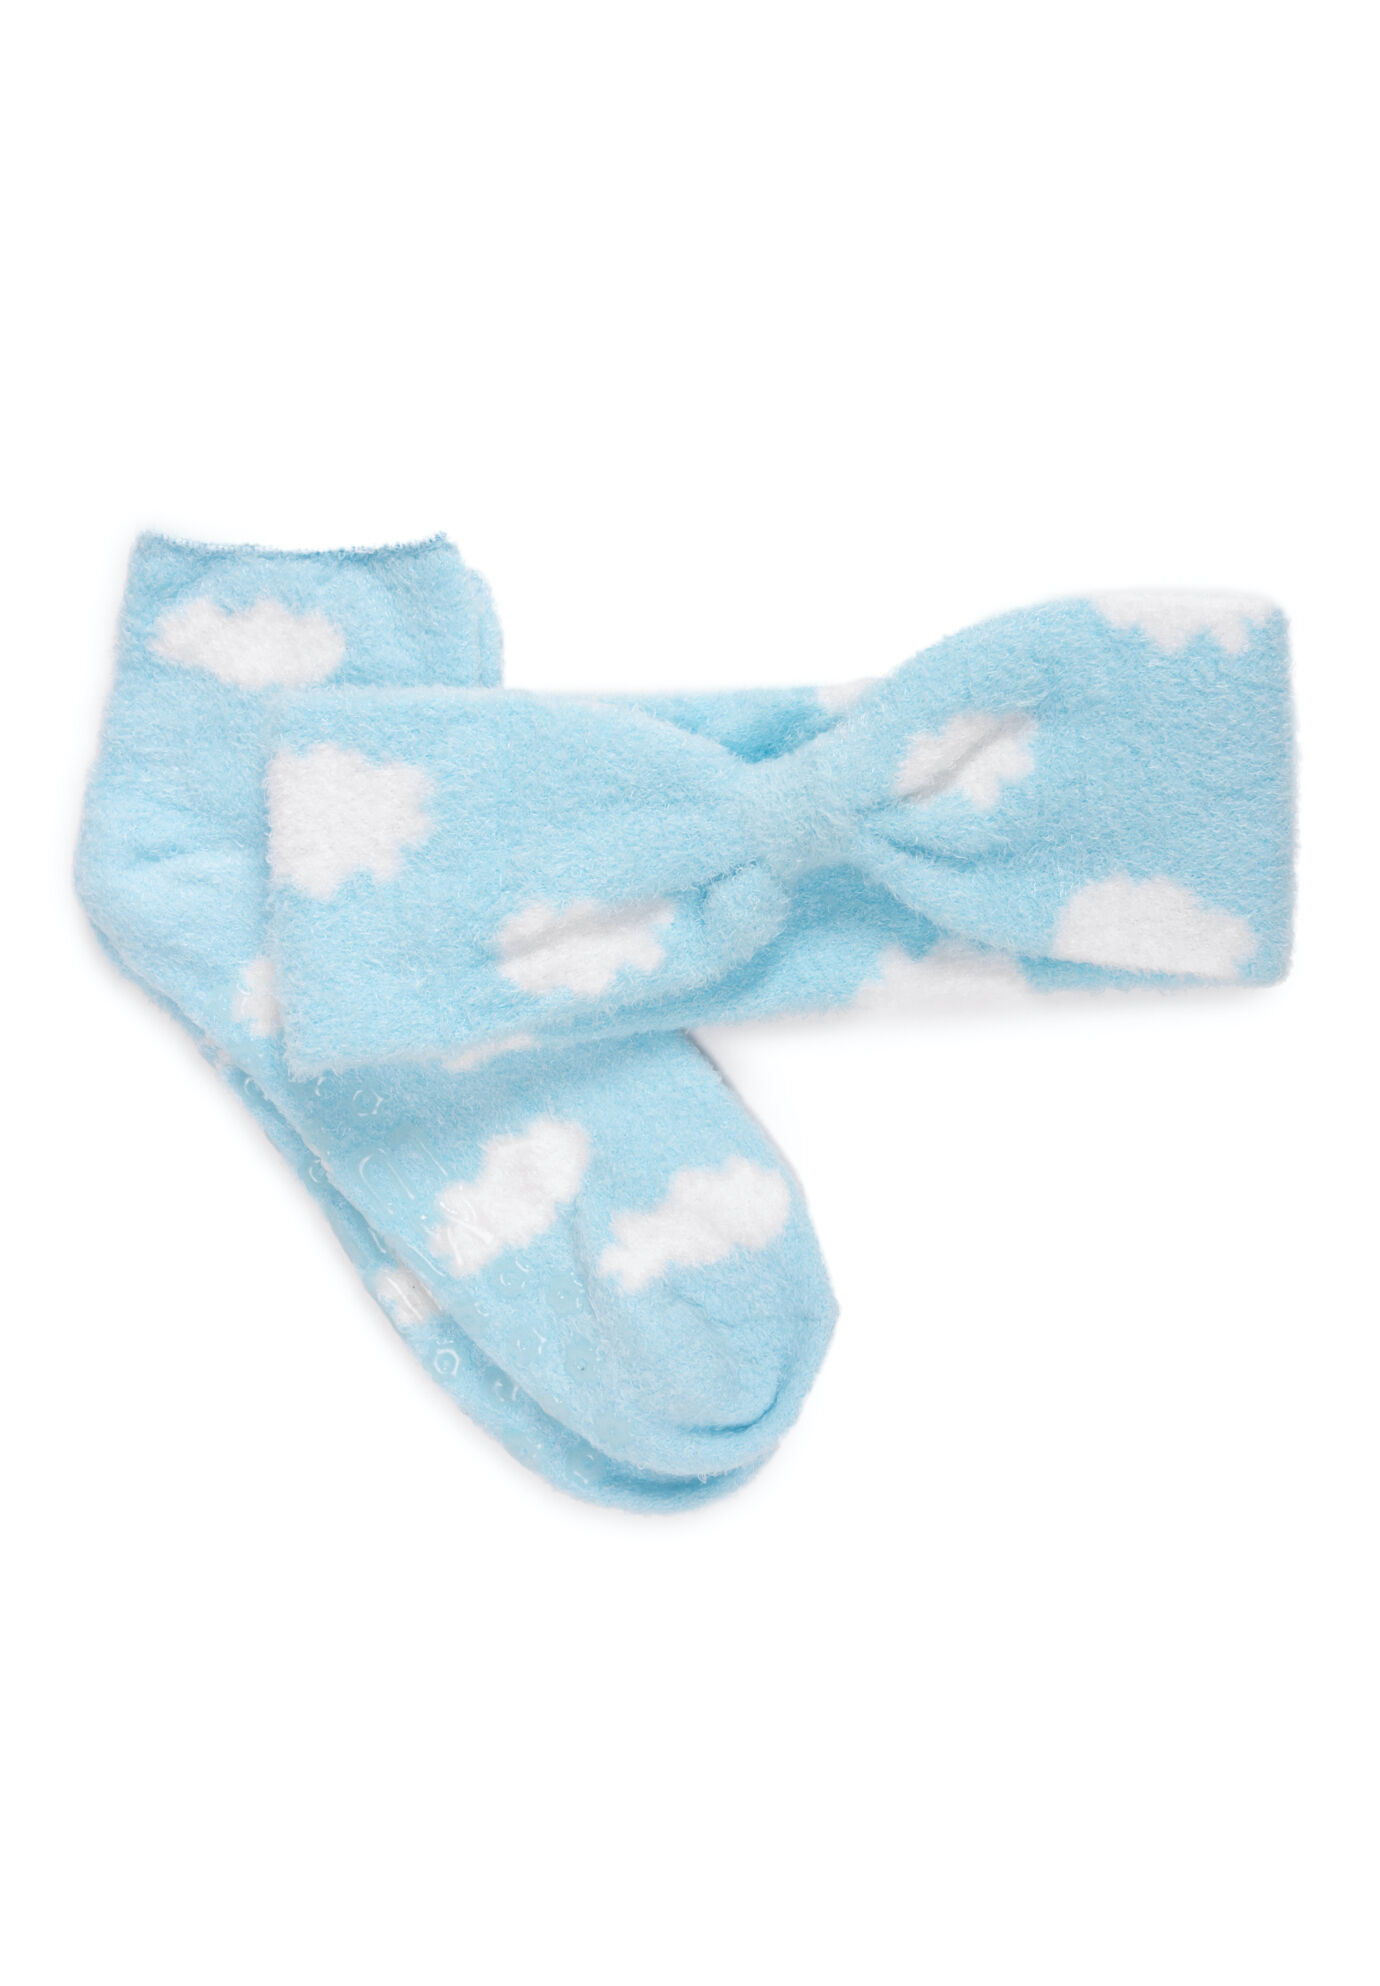 Women's Aloe Infused Sock And Headband Set by MUK LUKS in Light Blue (Size ONE)